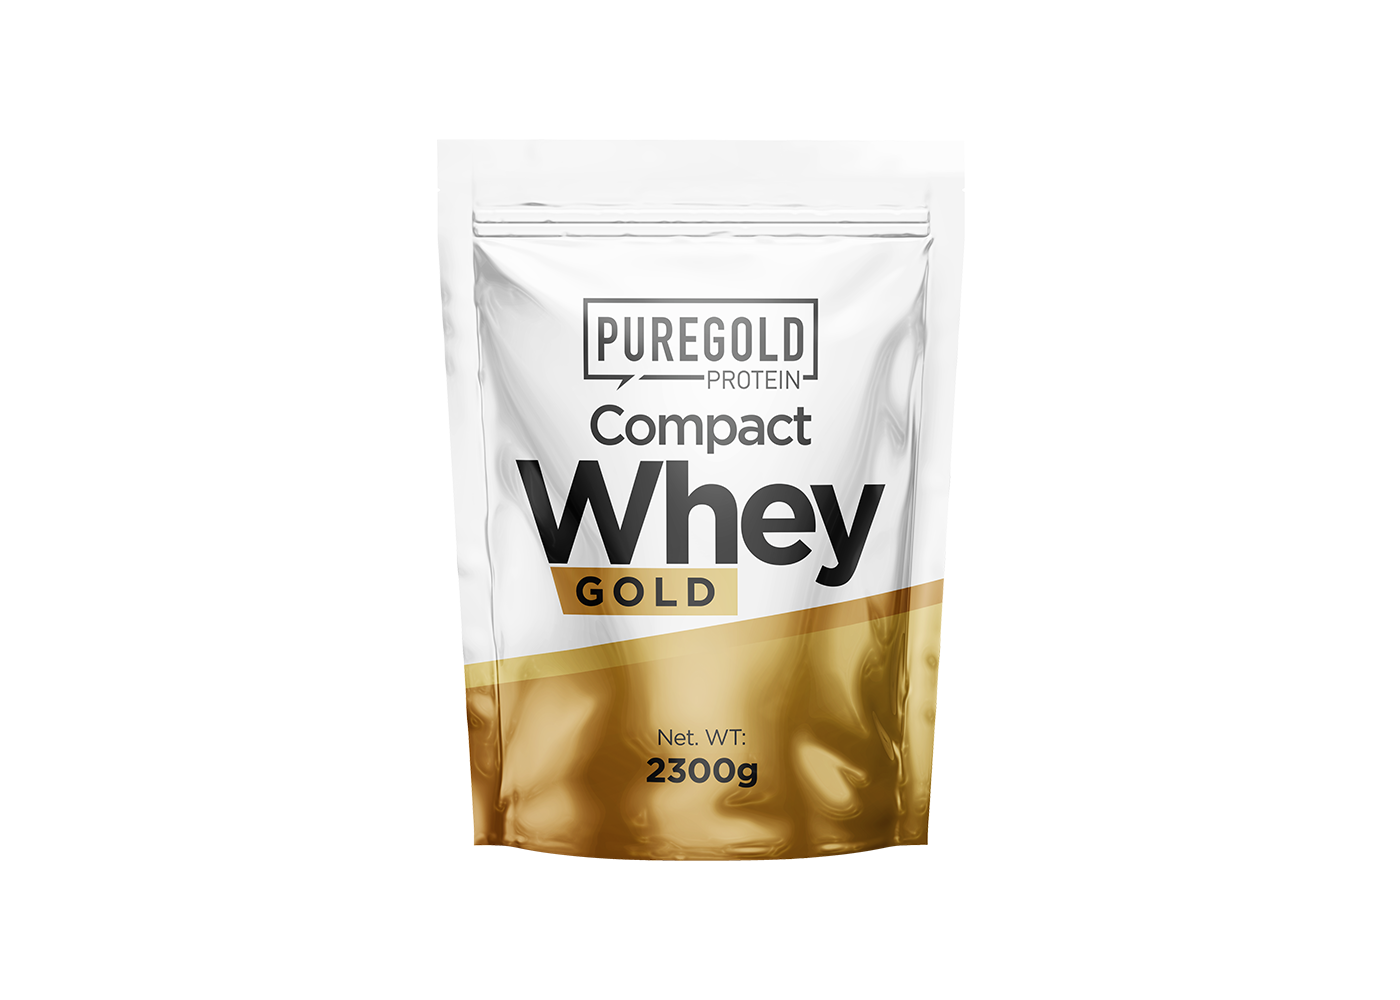 Pure Gold PGP Compact Whey Gold